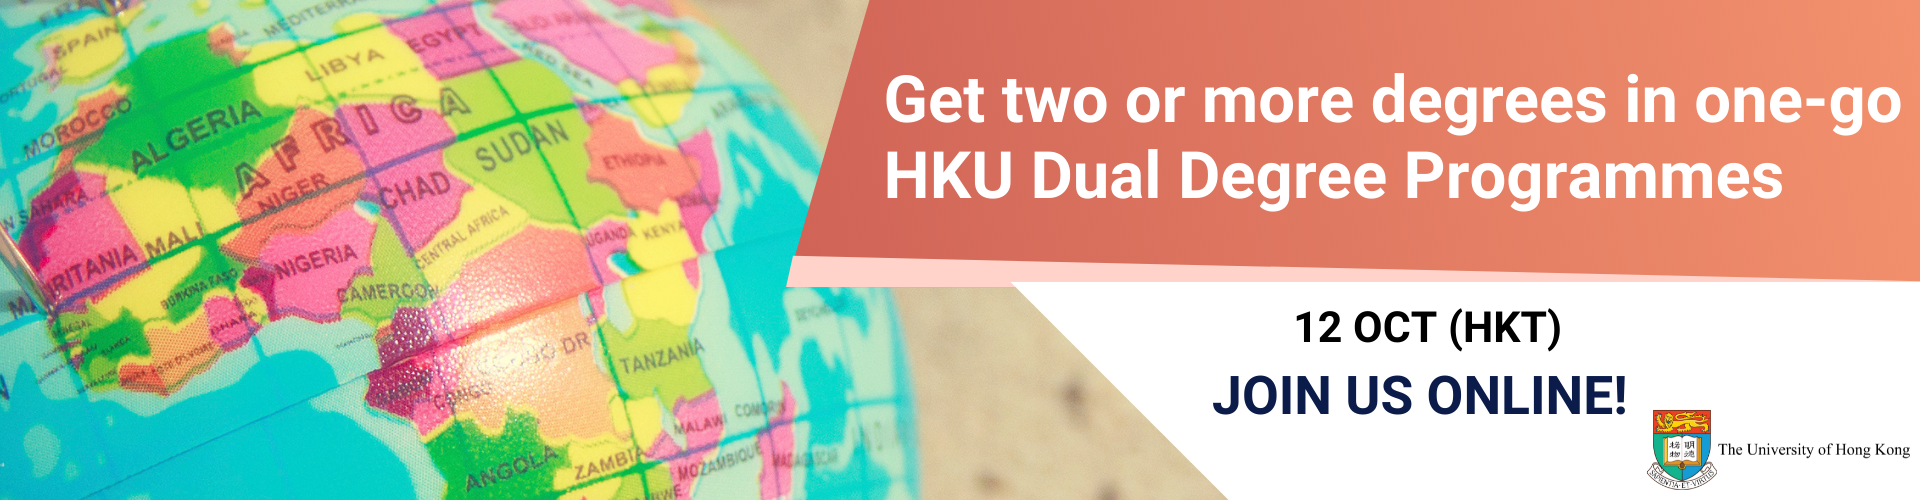 Animated text "Get two or more degrees in one-go HKU Dual Degree Programmes 12 Oct (HKT) Join us online" with photo of the globe